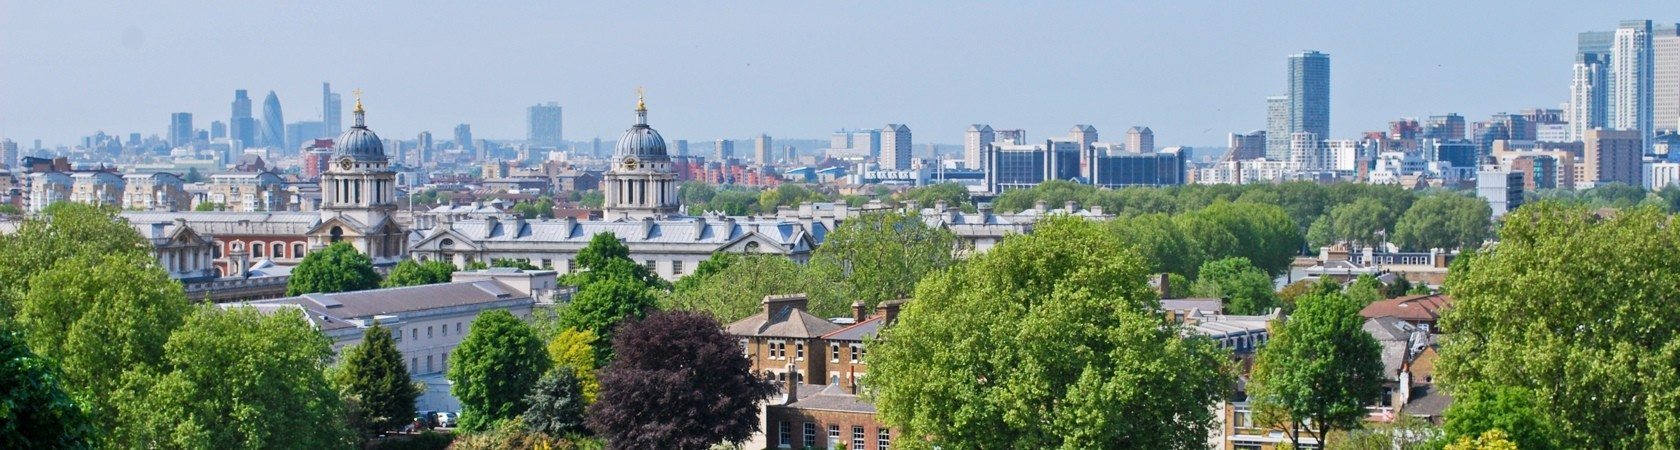 View of historic Greenwich London